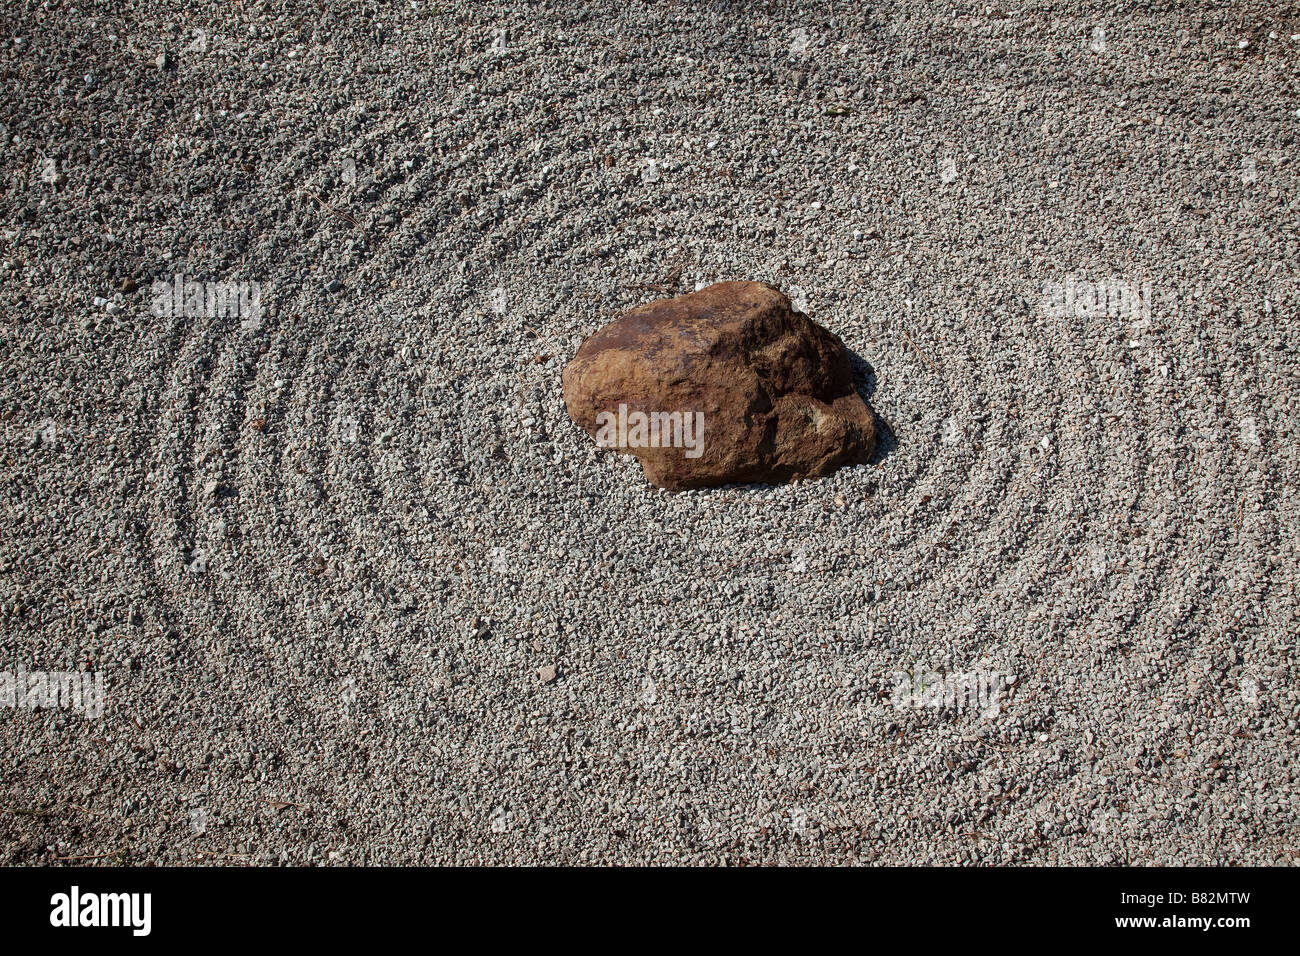 A tidy circular pattern rests around this anchoring rock in a Japanese rock garden  Stock Photo